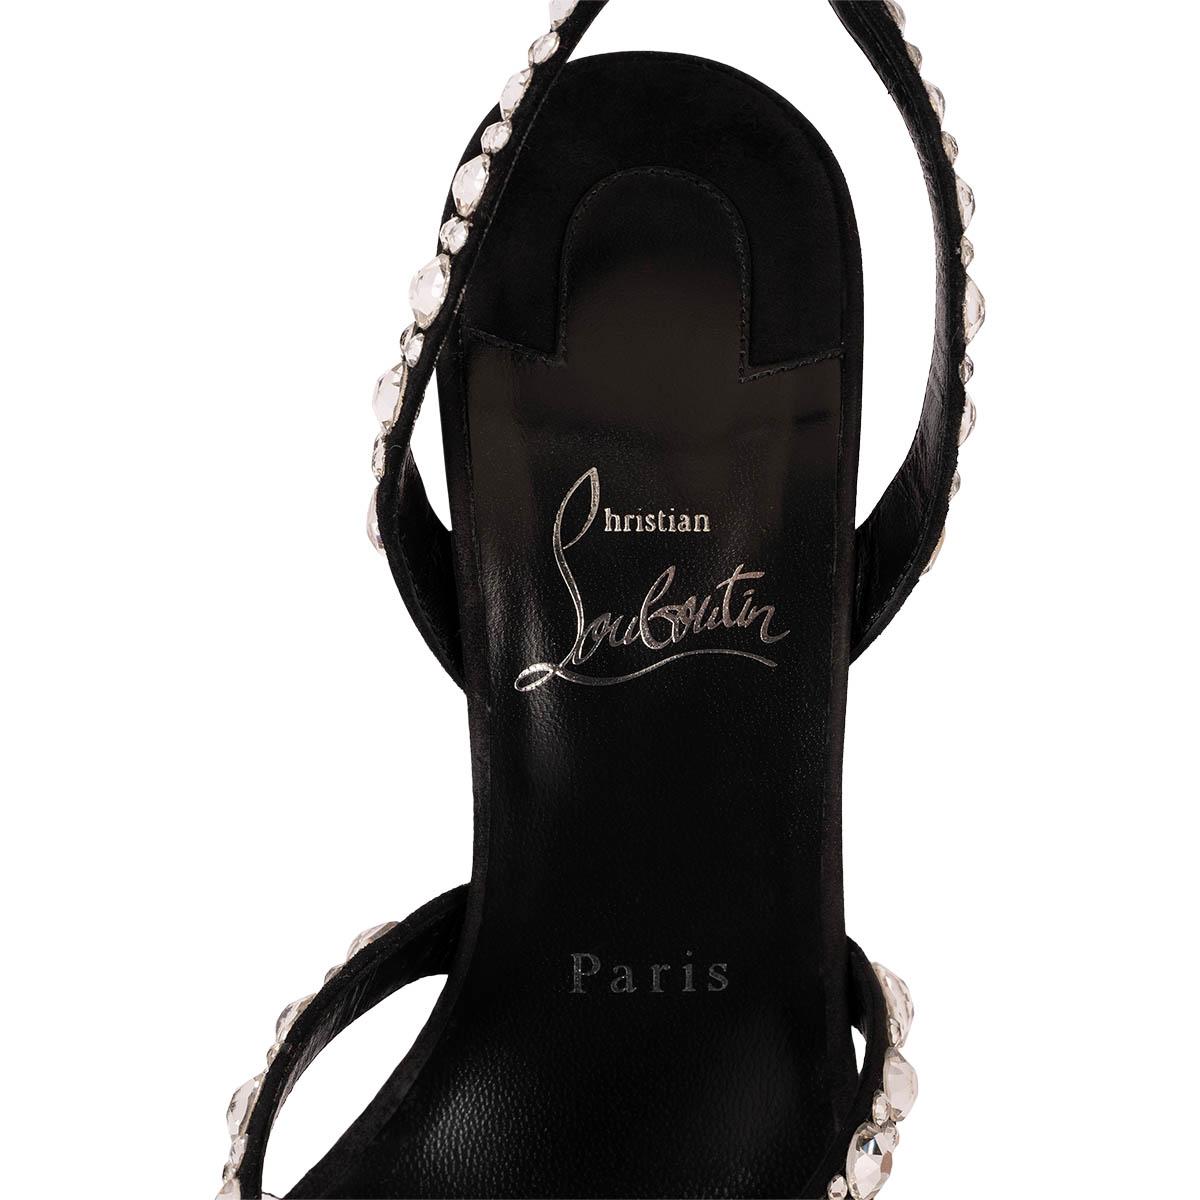 CHRISTIAN LOUBOUTIN black suede EMILIE STRASS 100 Sandals Shoes 37.5 For Sale 4